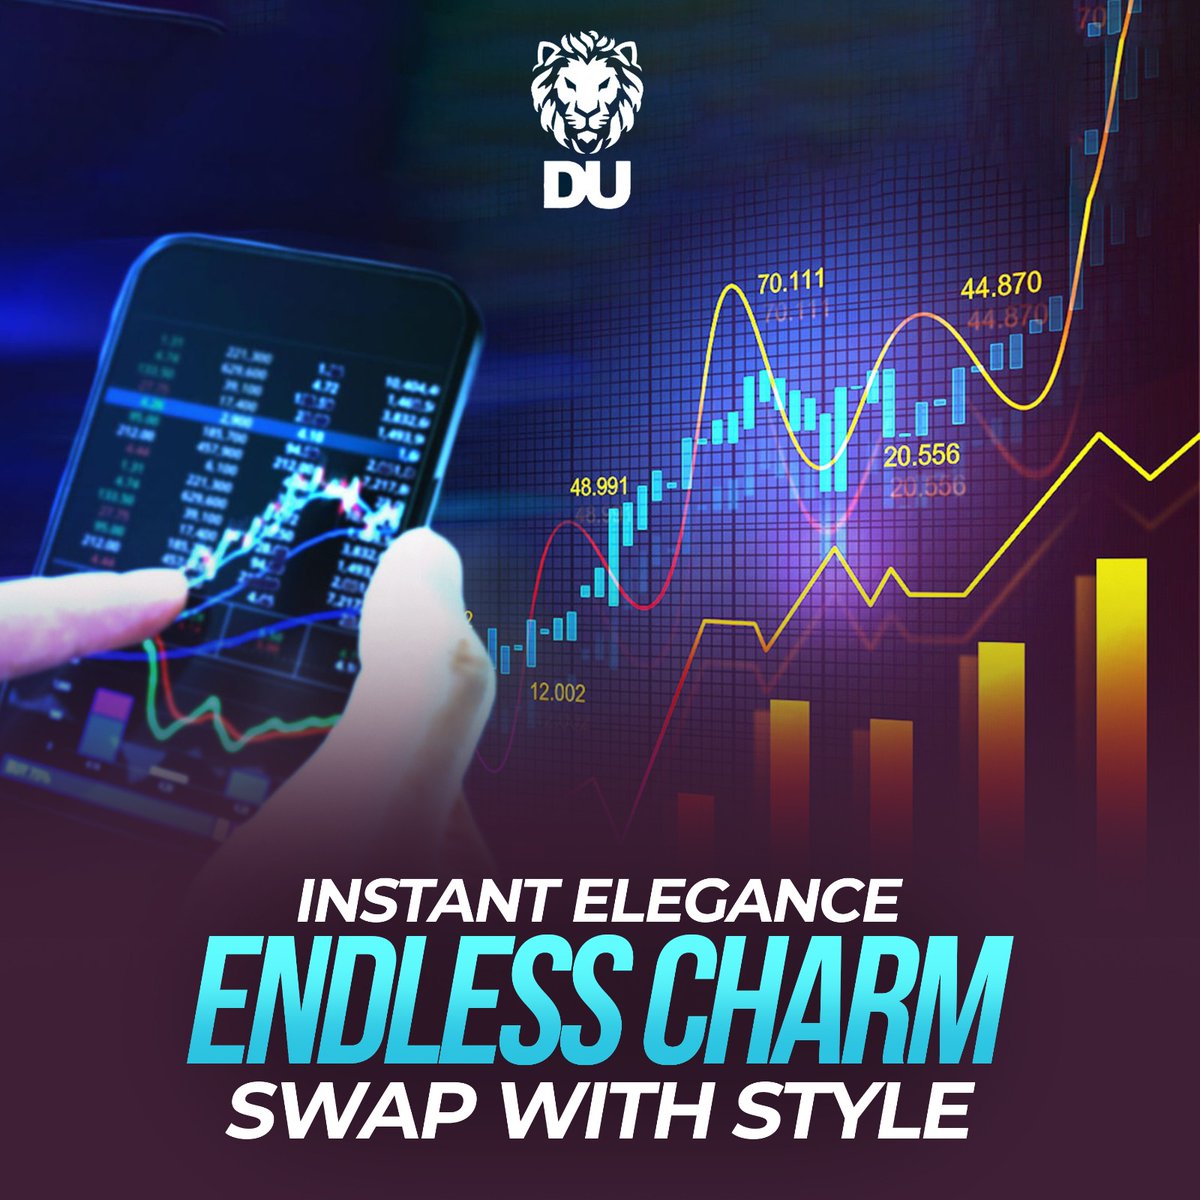 Instant elegance, endless charm - swap with style using DU Token! 💫 Dive into a world of seamless trading and elevate your crypto experience to new heights. ✨ 

#DUtoken #CryptoSwap #Elegance #Charm #Empowerment #FinancialFreedom #SwapBetter #swapping #staketoelevate #stakeearn